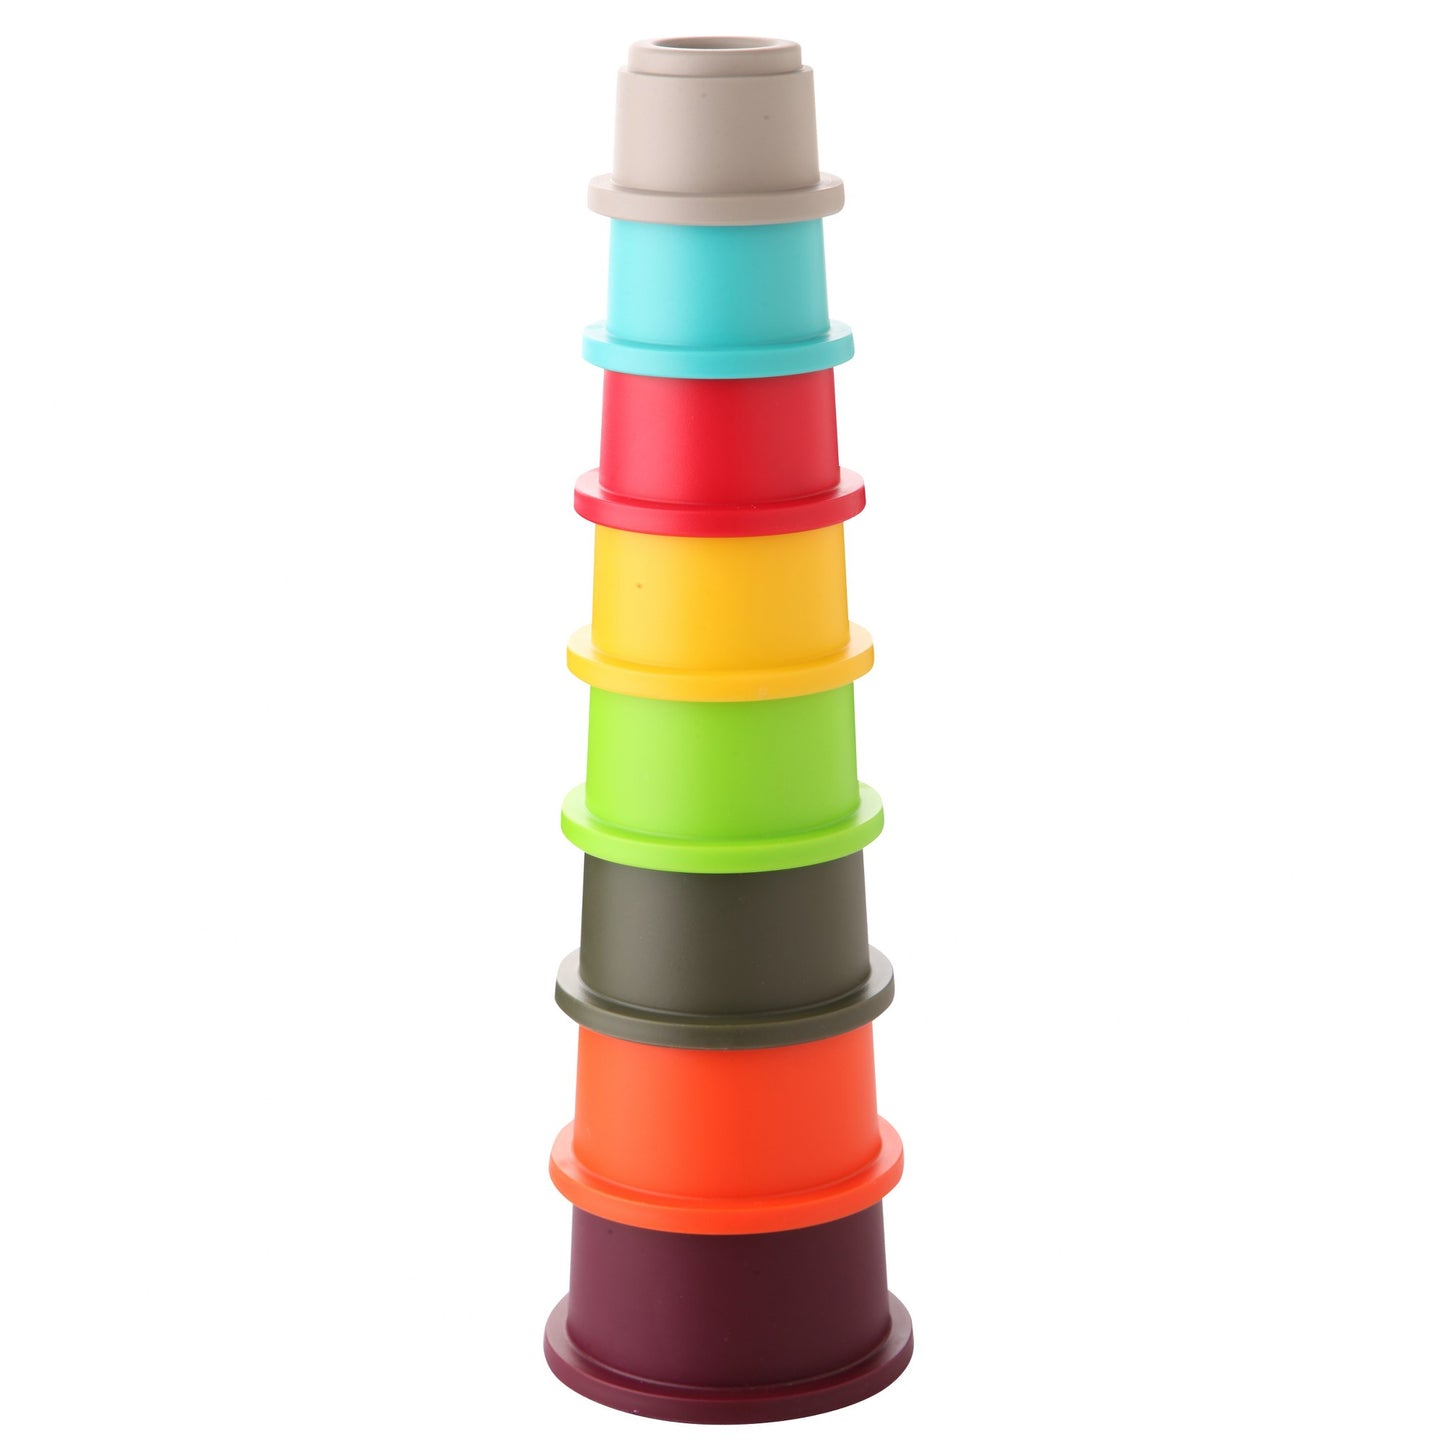 Stack Up Cups-Blocks, Build, catedu, Communication, Coordination, Cups, Imagination, Language, Motor, Pretend, Skills, Stack, Tower-Let's Be Child-[Too Twee]-[Tootwee]-[baby]-[newborn]-[clothes]-[essentials]-[toys]-[Lebanon]